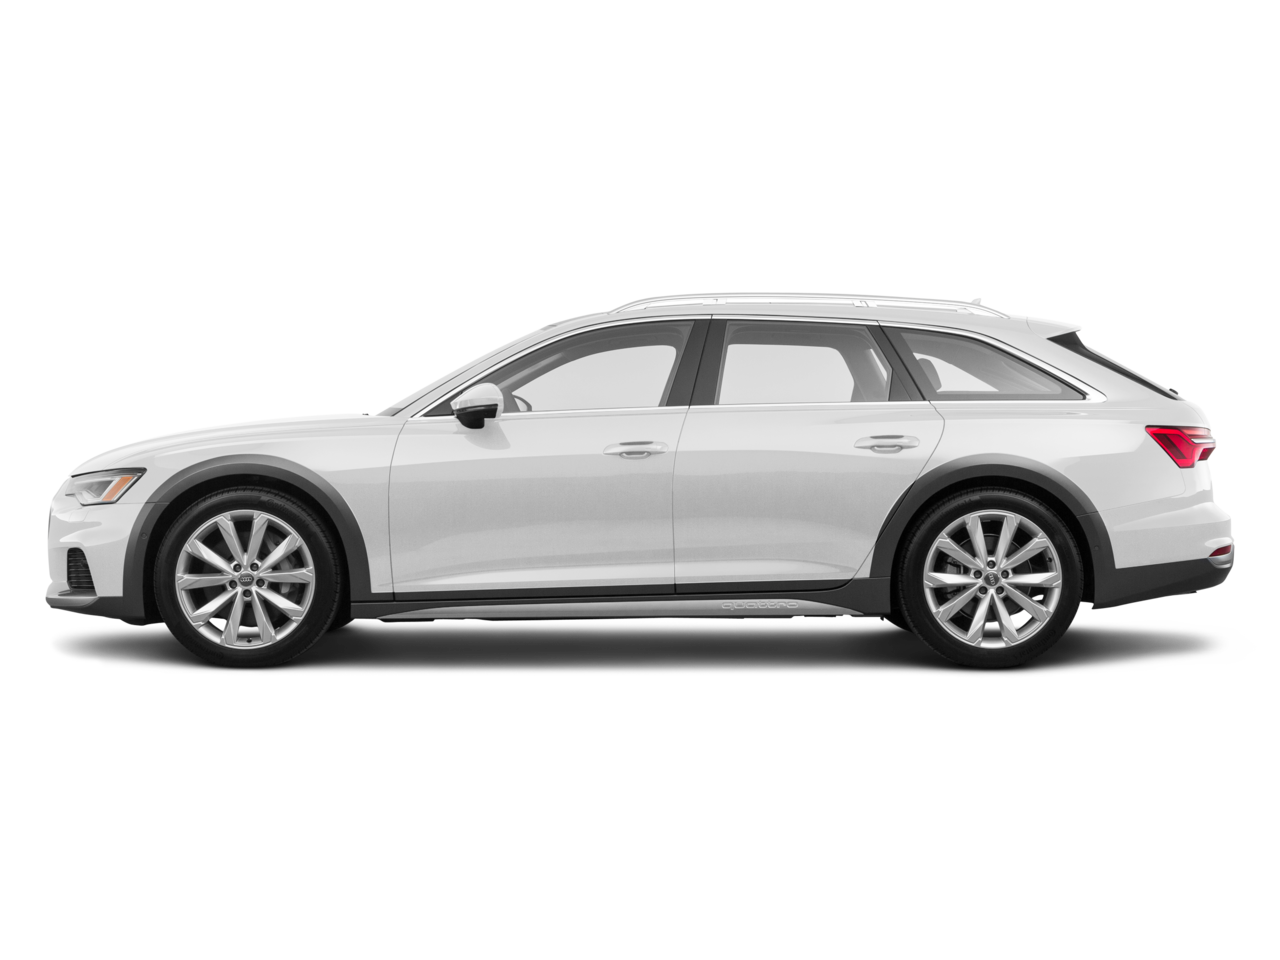 Download PNG image - Audi A6 Allroad PNG File 